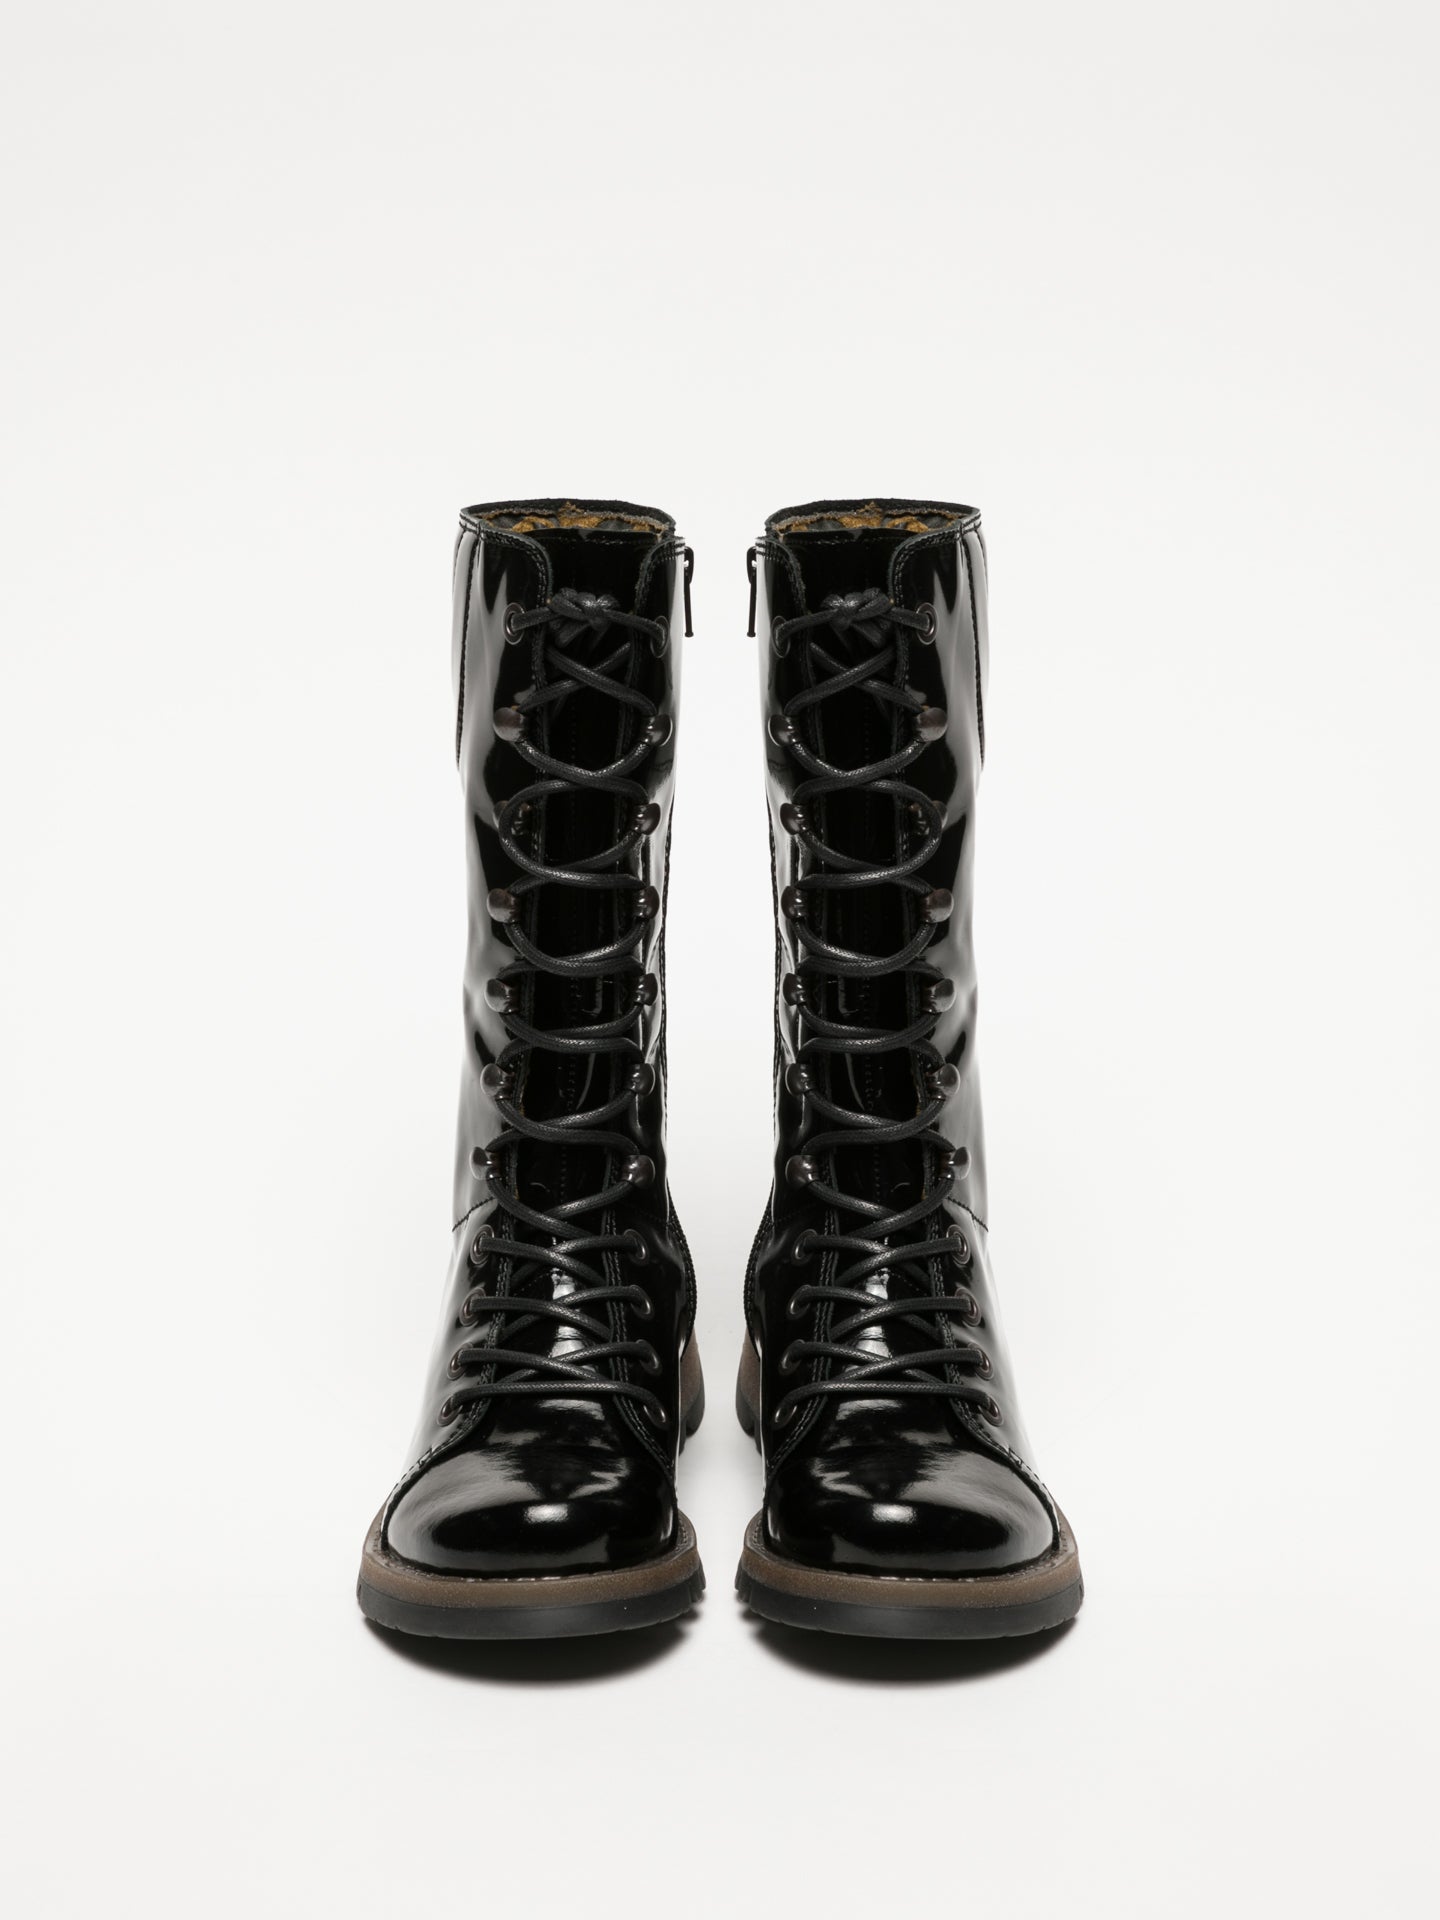 Fly London Coal Black Lace-up Boots